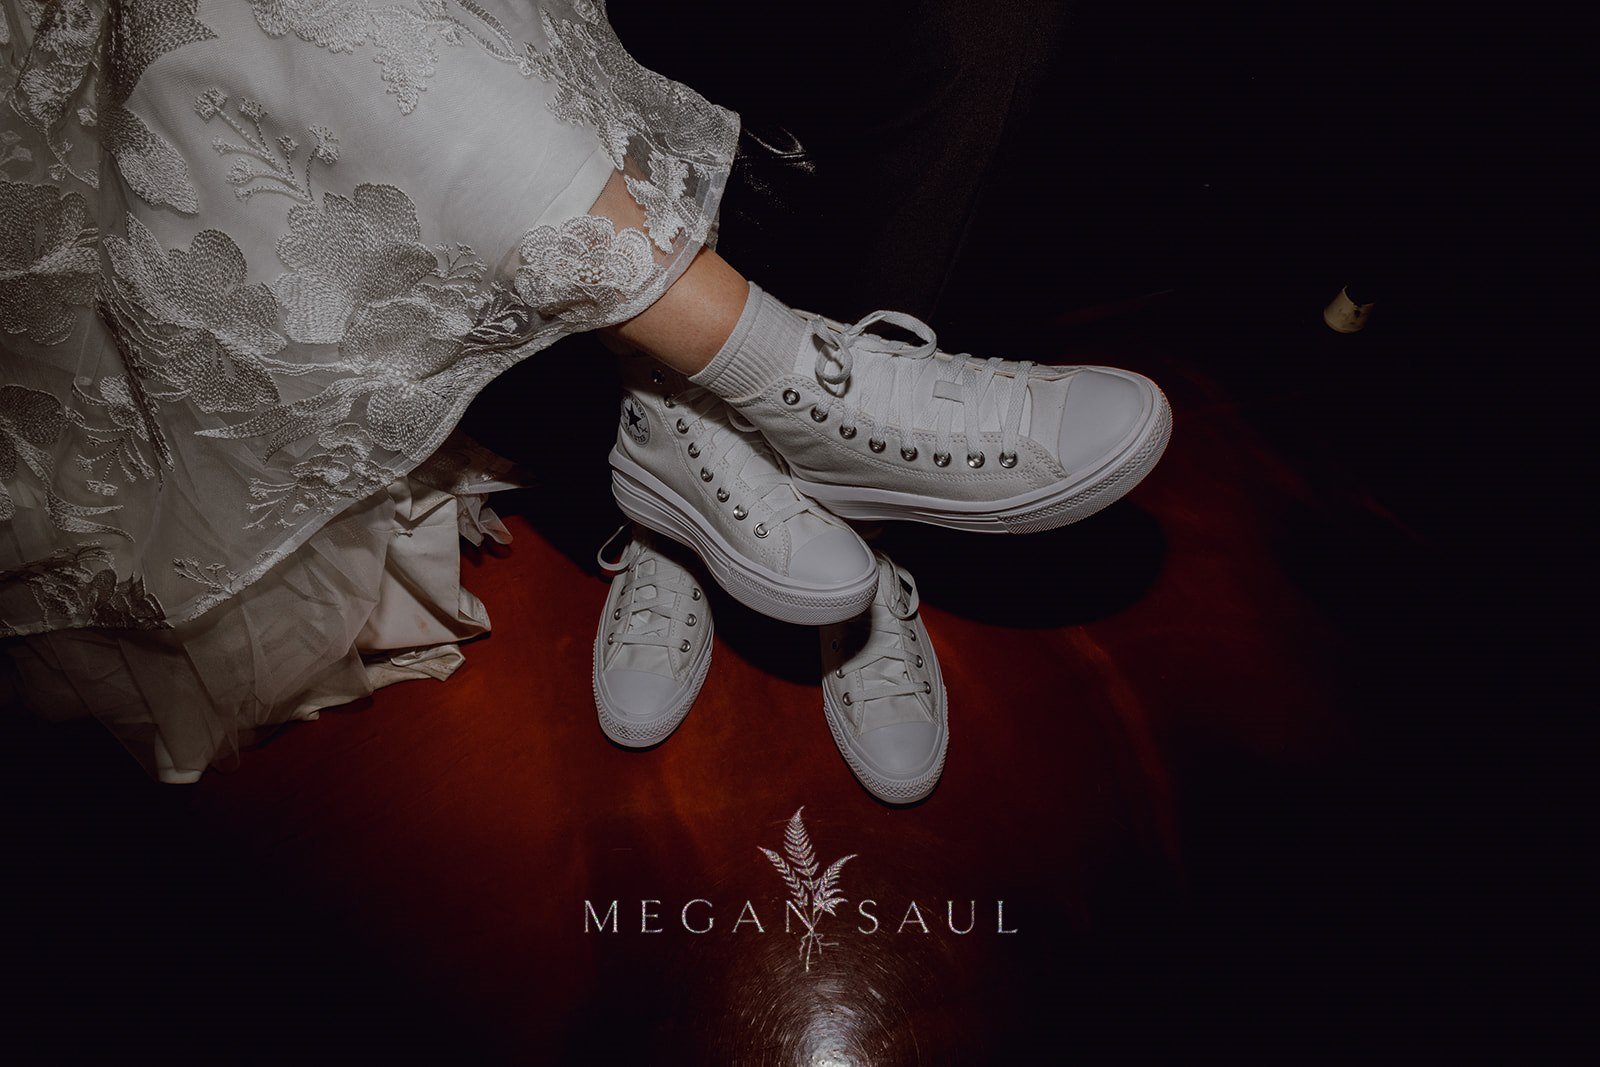 CHICAGO-WEDDING-PHOTOGRAPHY-BY-ARTISTS-AND-STORIES-BY-MEGAN-SAUL-RECEPTION (203 of 211)_websize.jpg